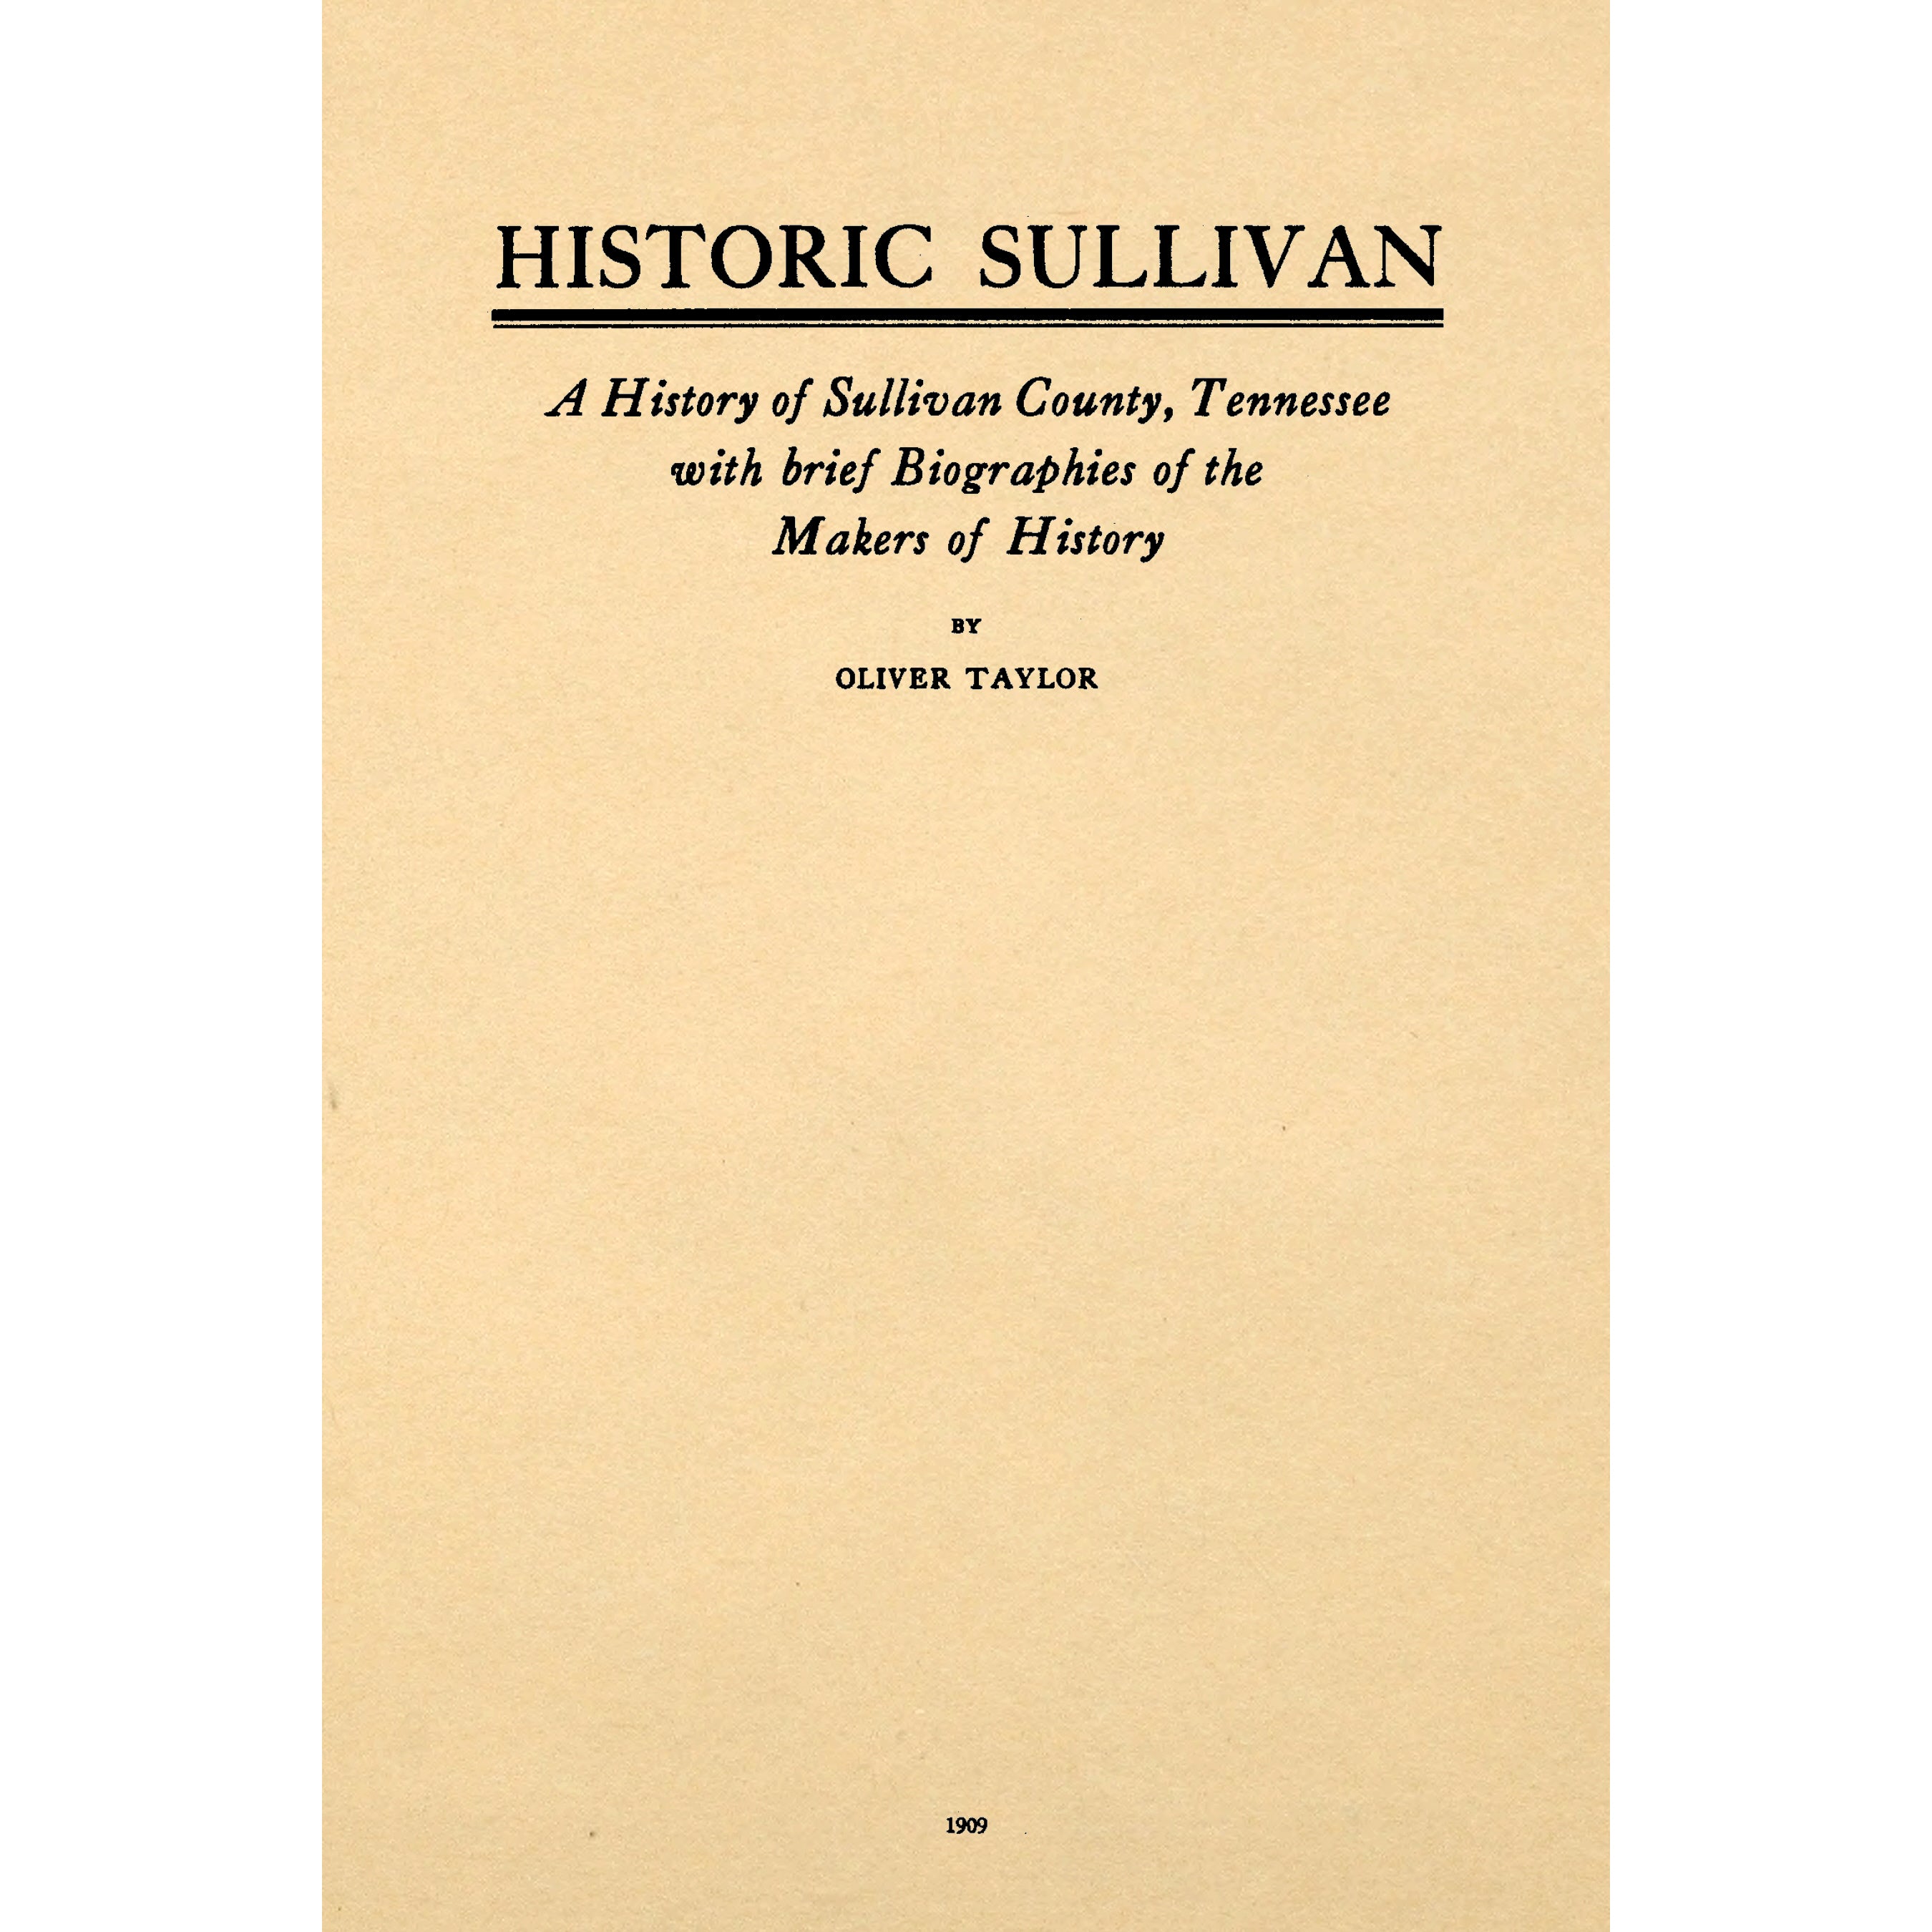 Historic Sullivan; A History of Sullivan County, Tennessee with brief Biographies of the Makers of History